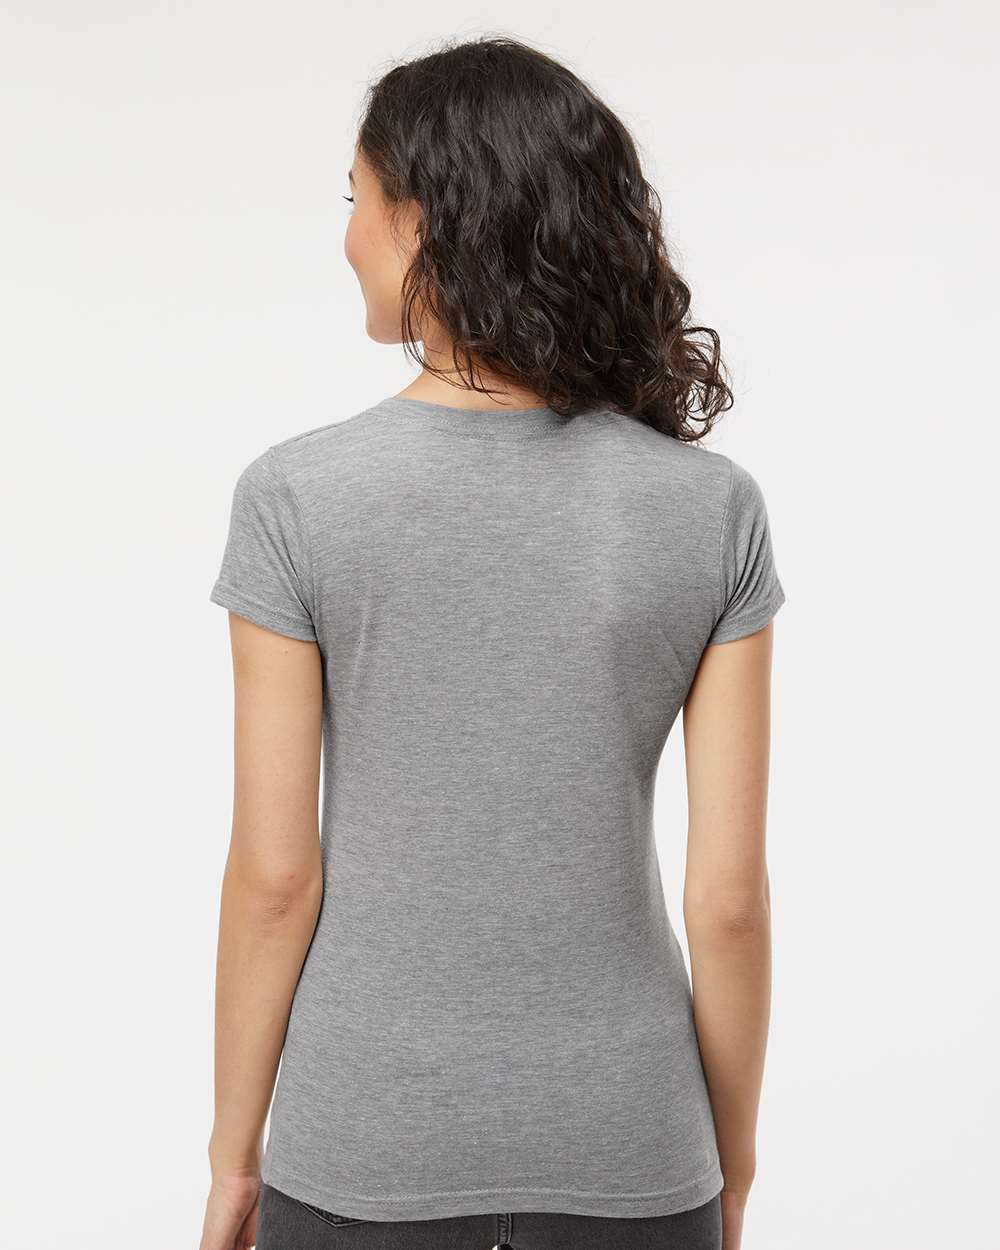 M&O Women's Deluxe Blend V-Neck T-Shirt 3542 #colormdl_Heather Grey